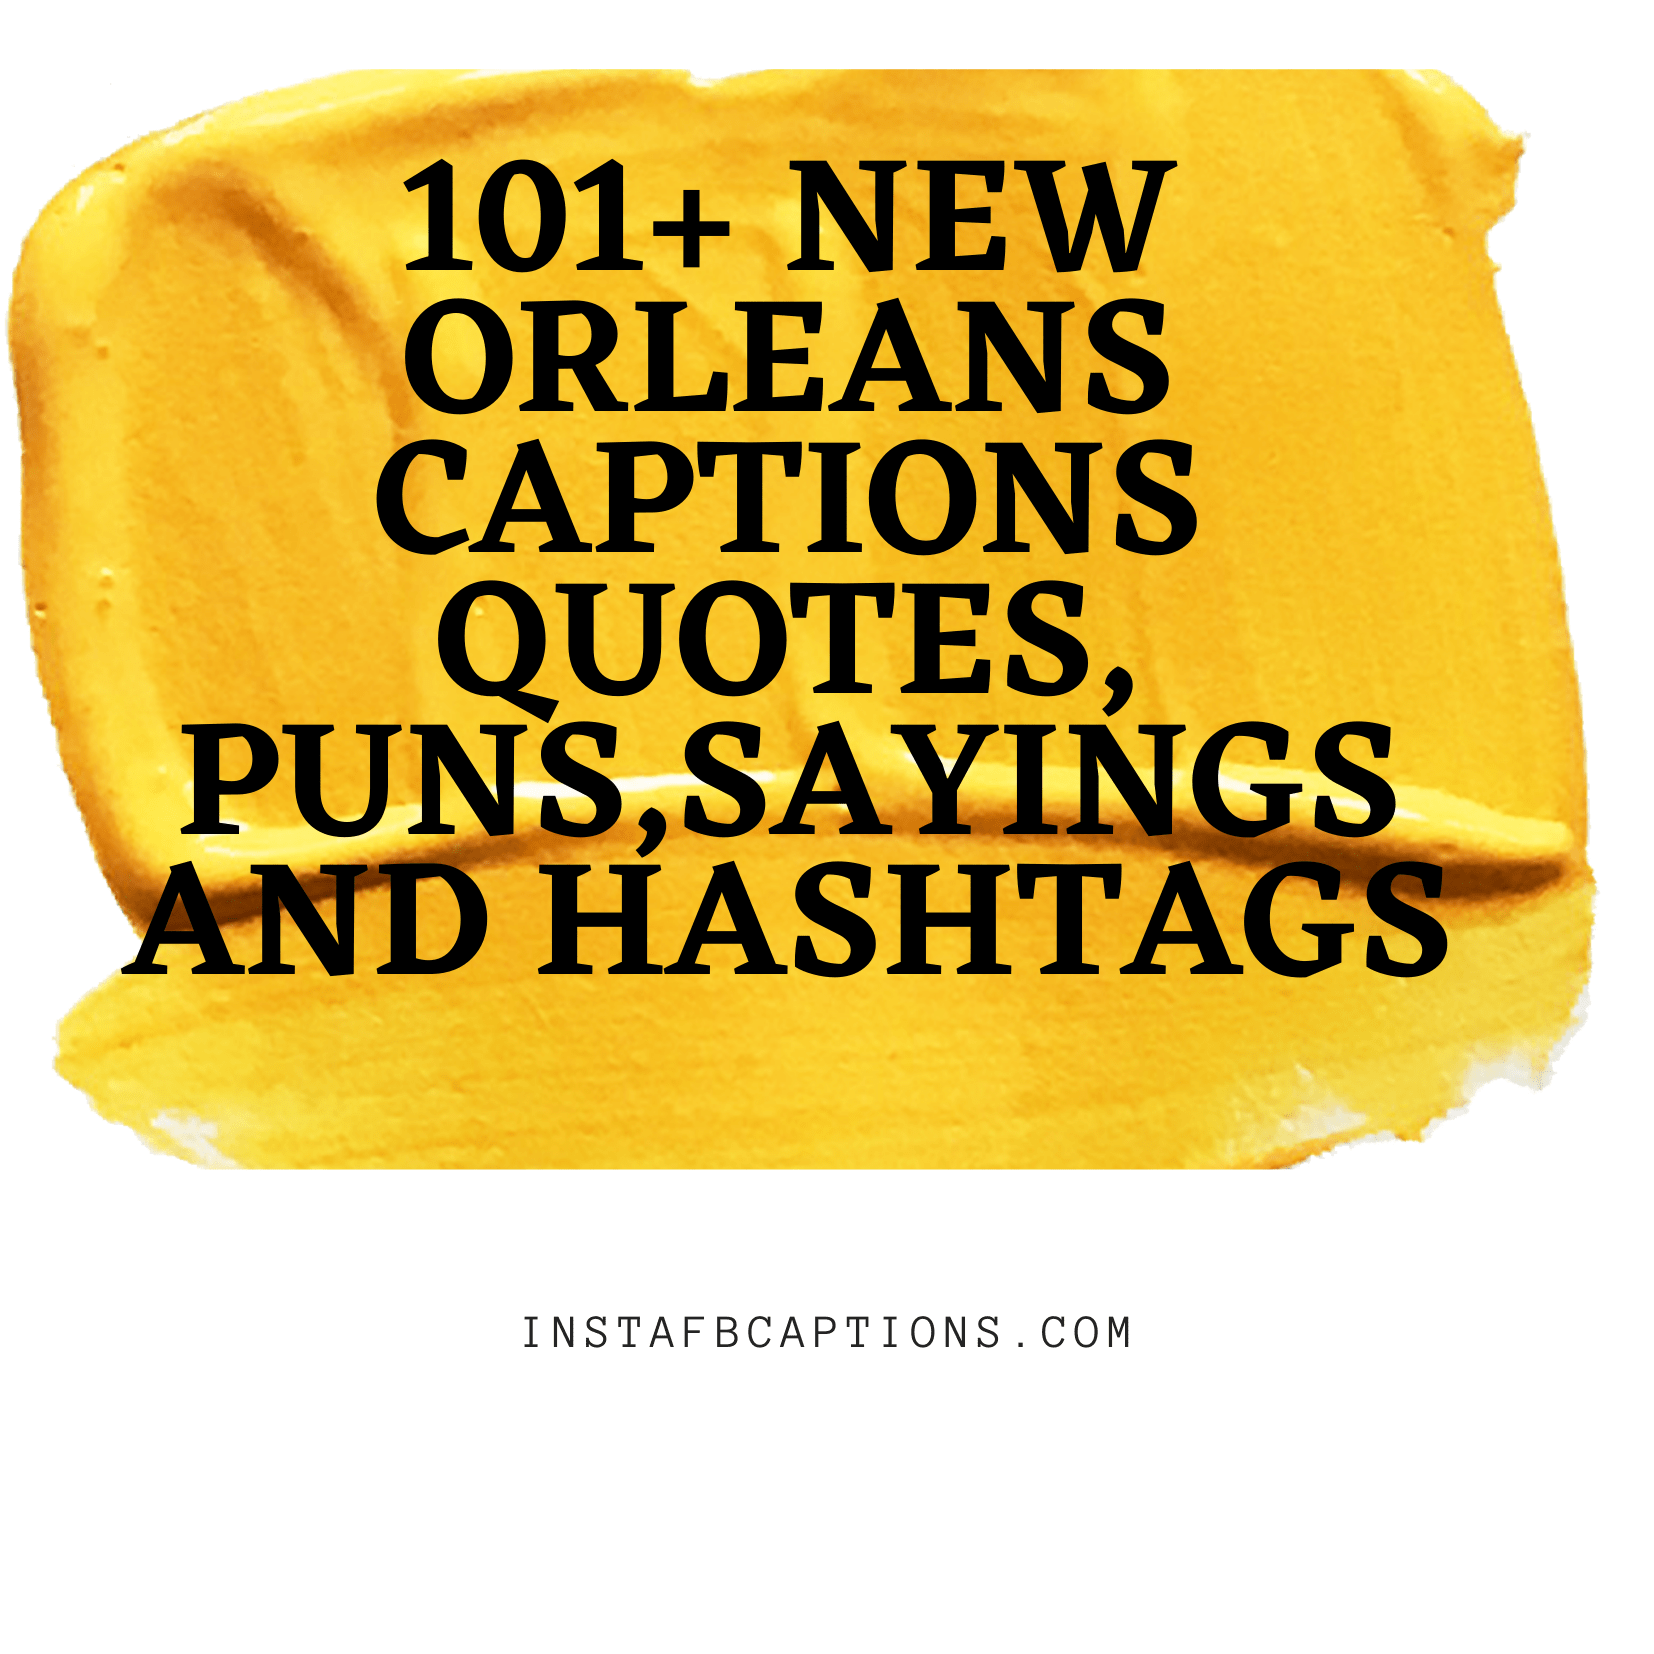 101+ New Orleans Captions Quotes Puns Sayings And Hashtags  - 101 New Orleans Captions Quotes Puns Sayings and Hashtags - New Orleans Instagram Captions and Quotes for 2022